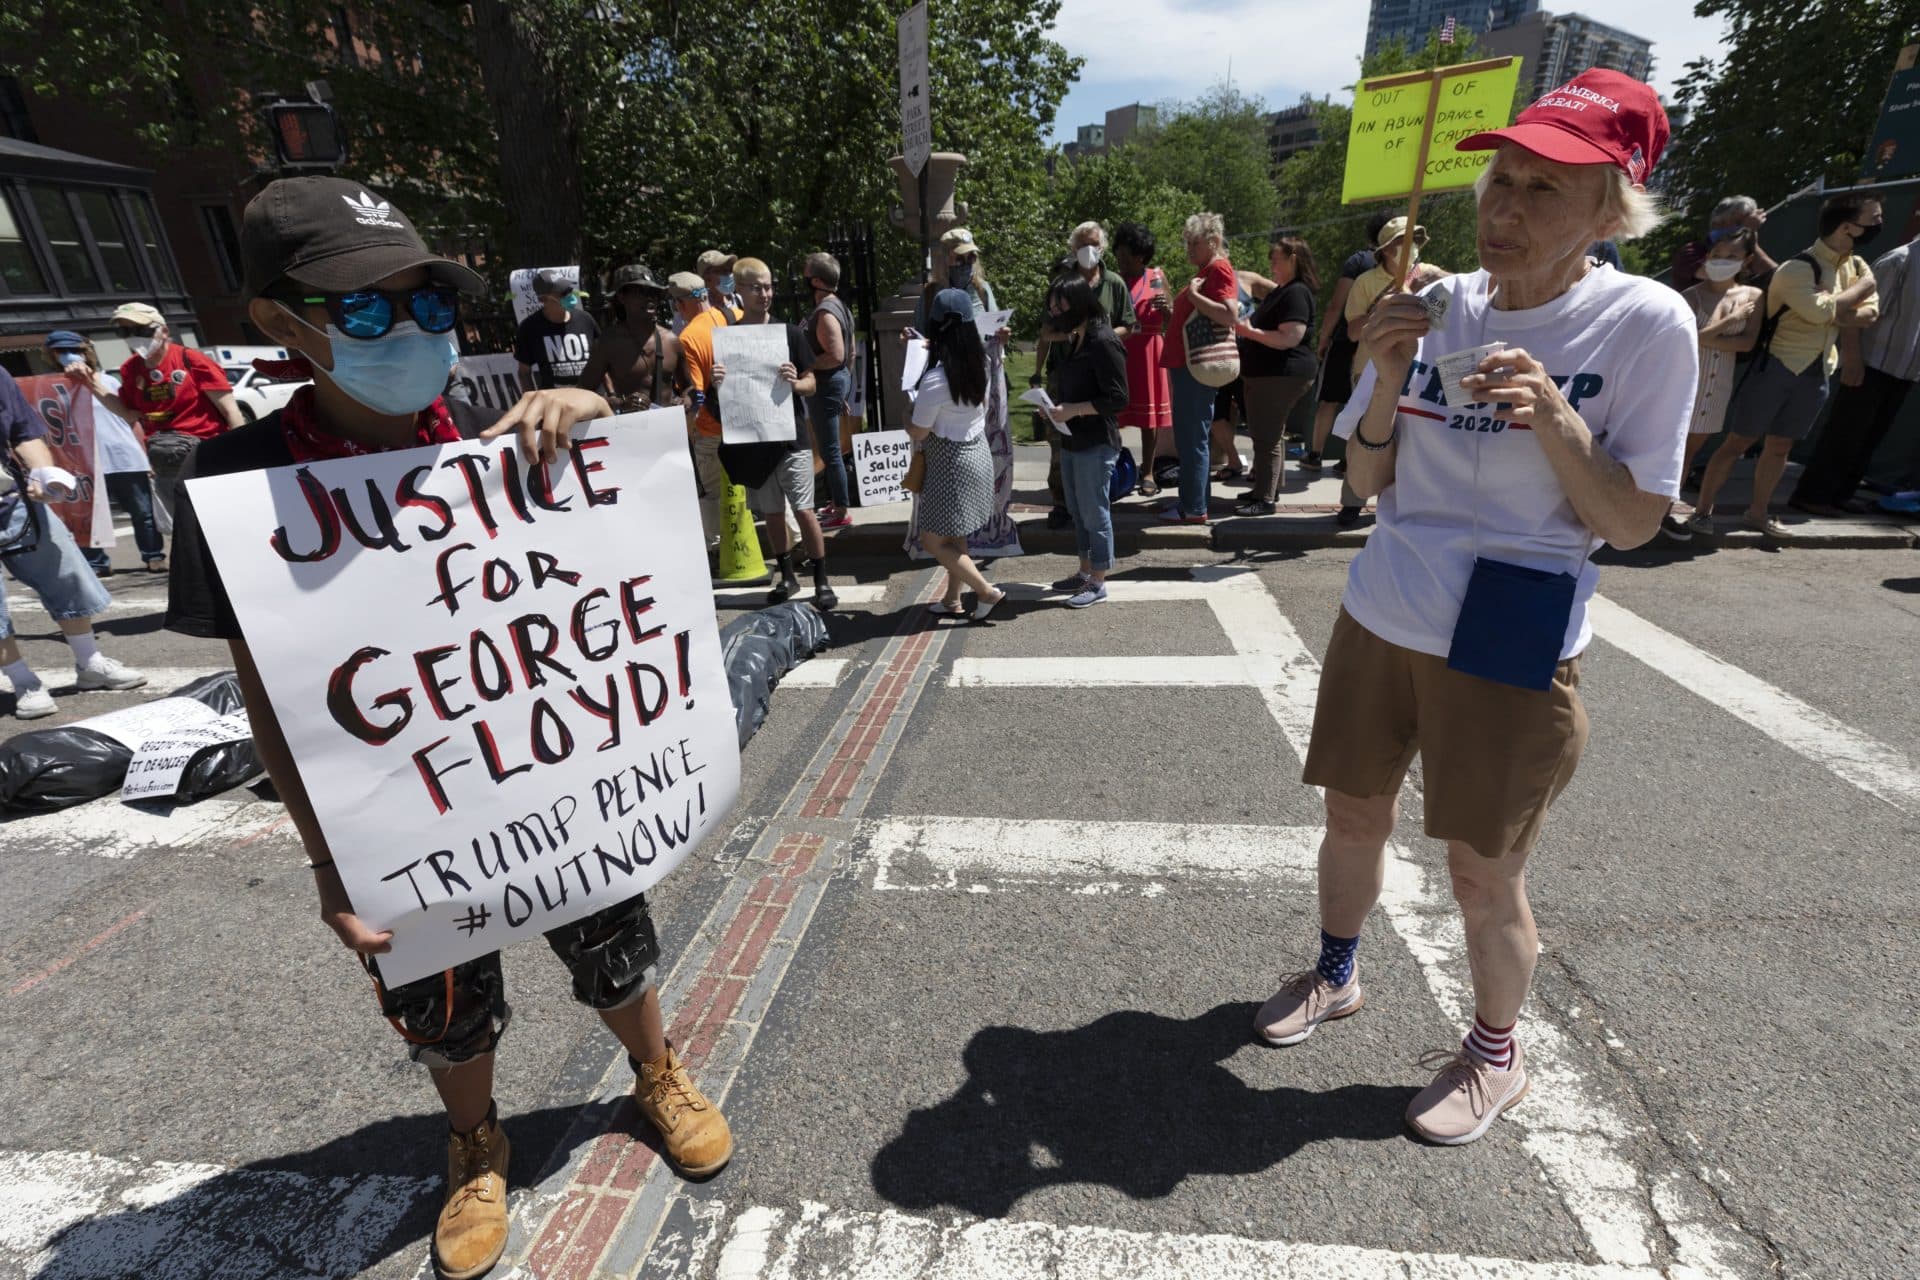 A Trump supporter stands next to a woman protesting against the death in police custody of George Floyd, Saturday, May 30, 2020, in Boston. (AP Photo/Michael Dwyer)